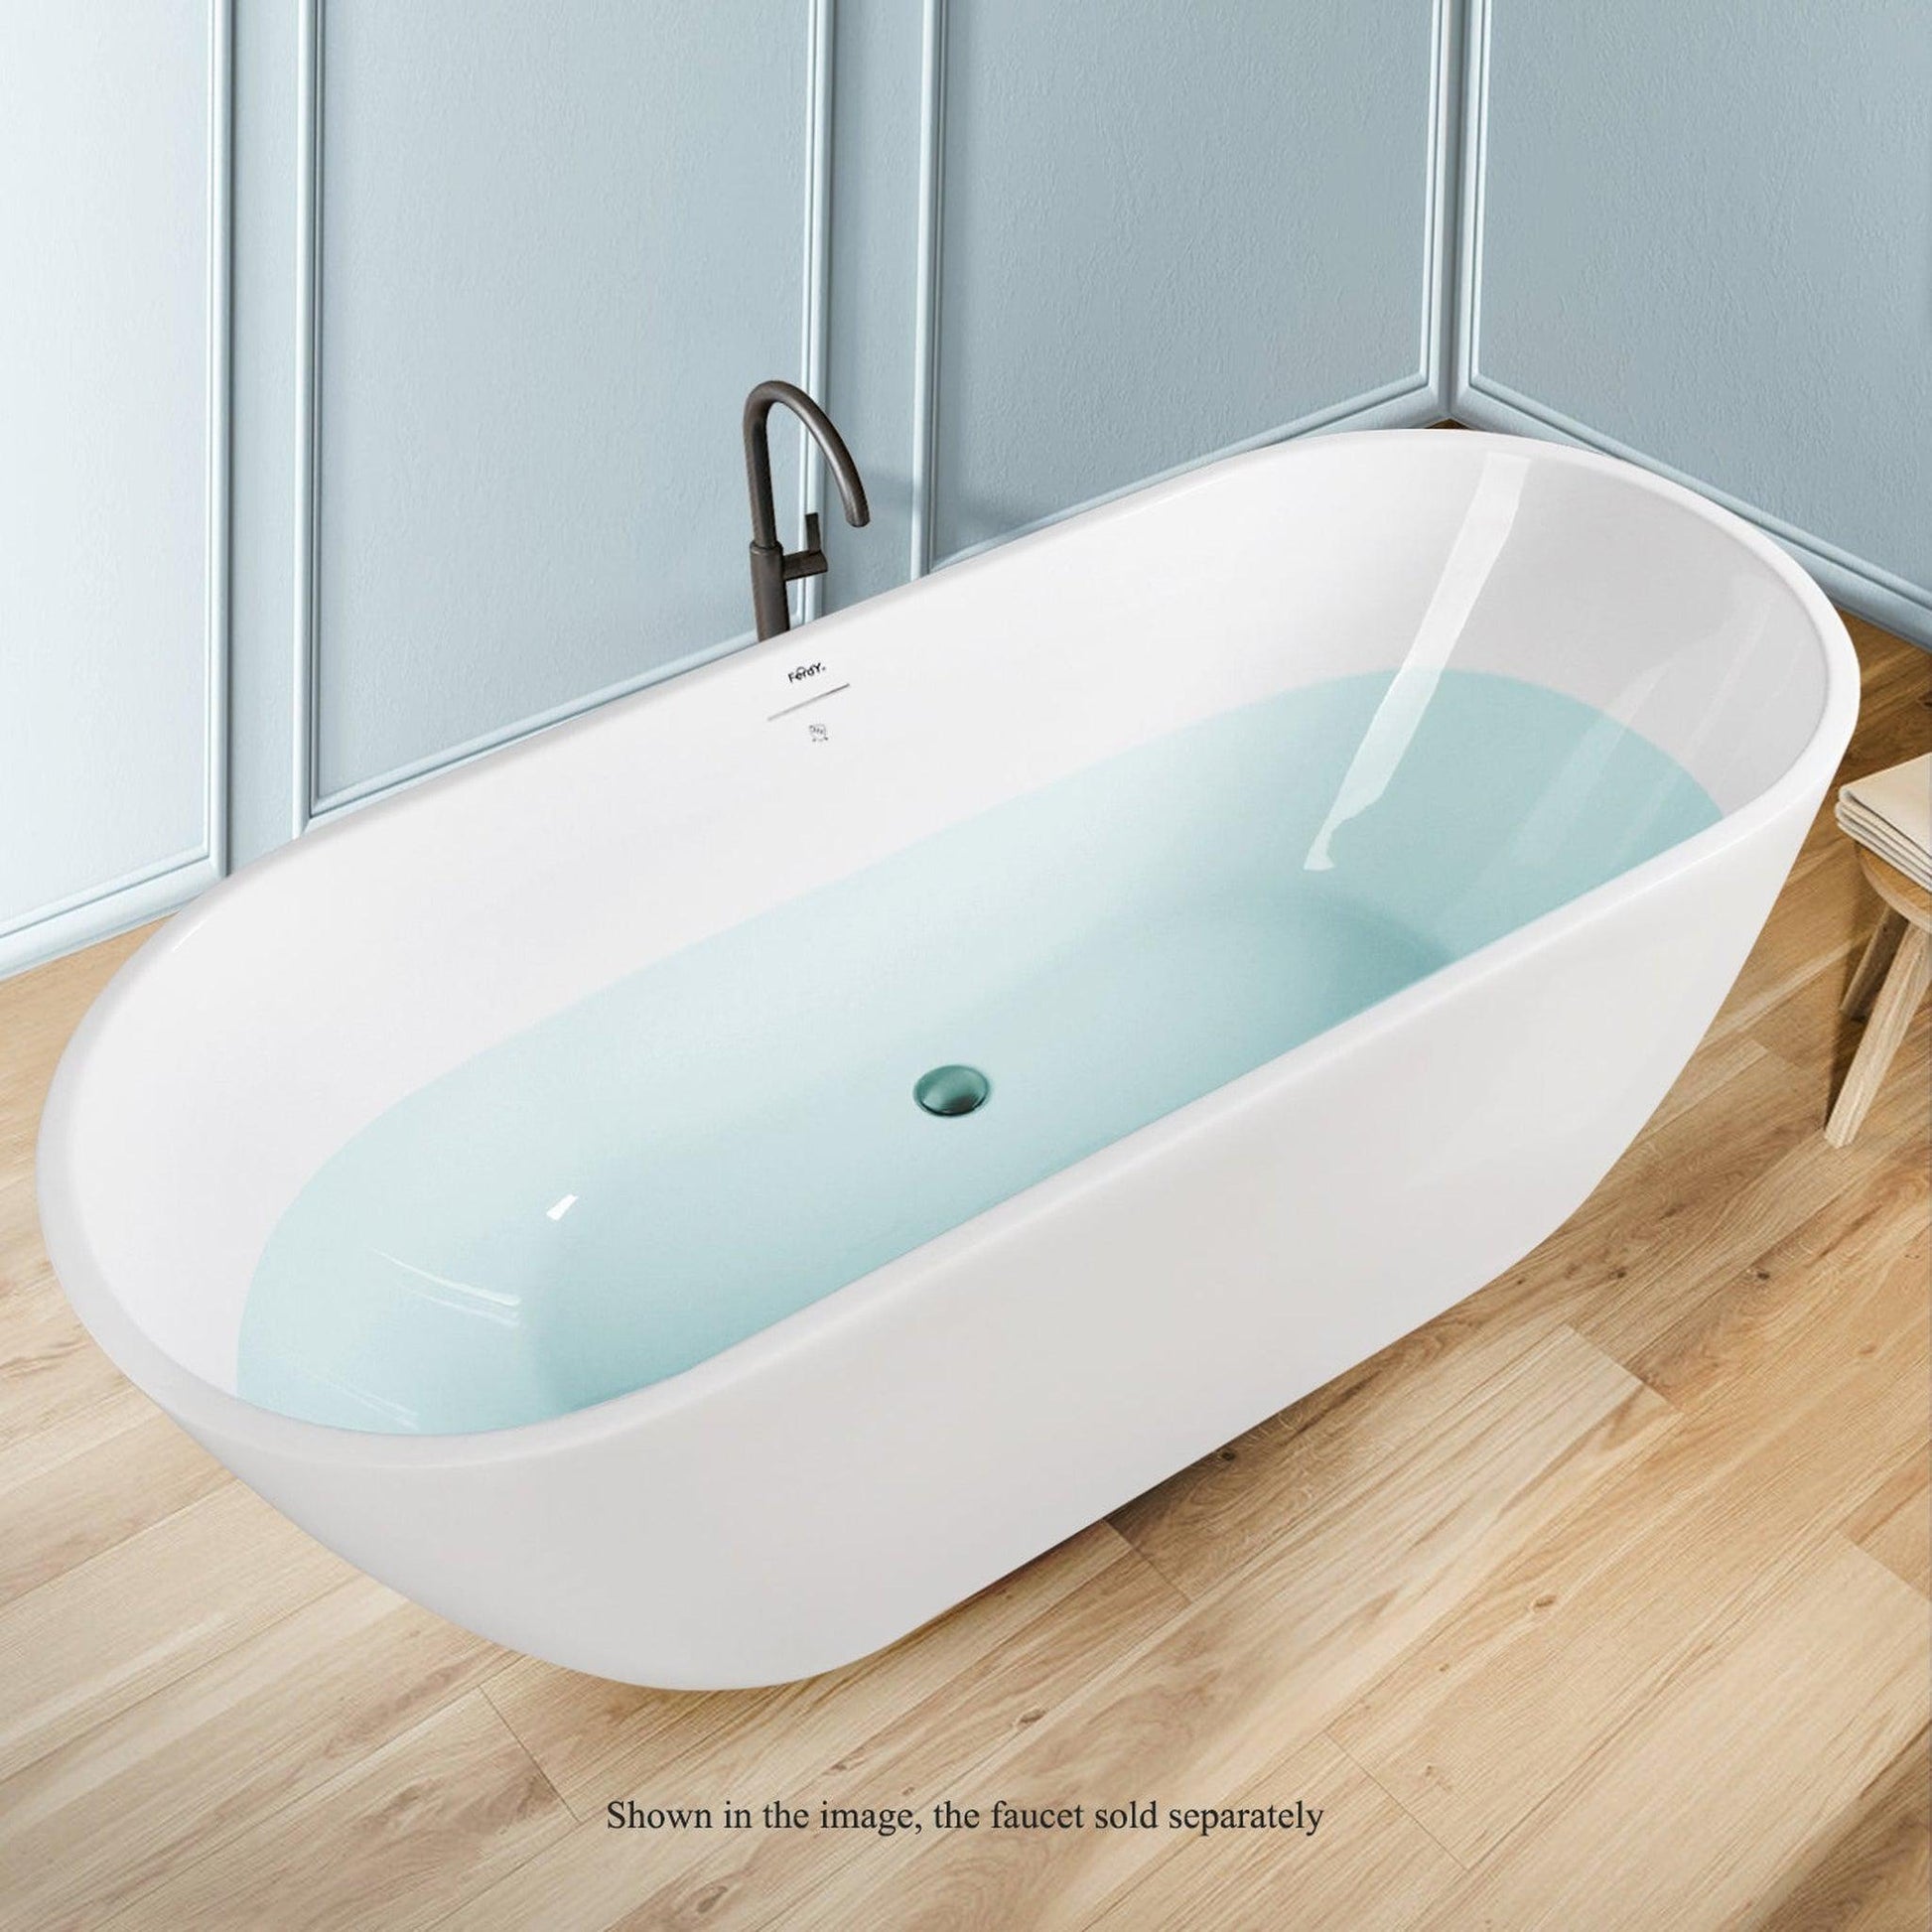 FerdY Bali 67" x 30" Oval Glossy White Acrylic Freestanding Roll Top Soaking Bathtub With Brushed Nickel Drain and Overflow